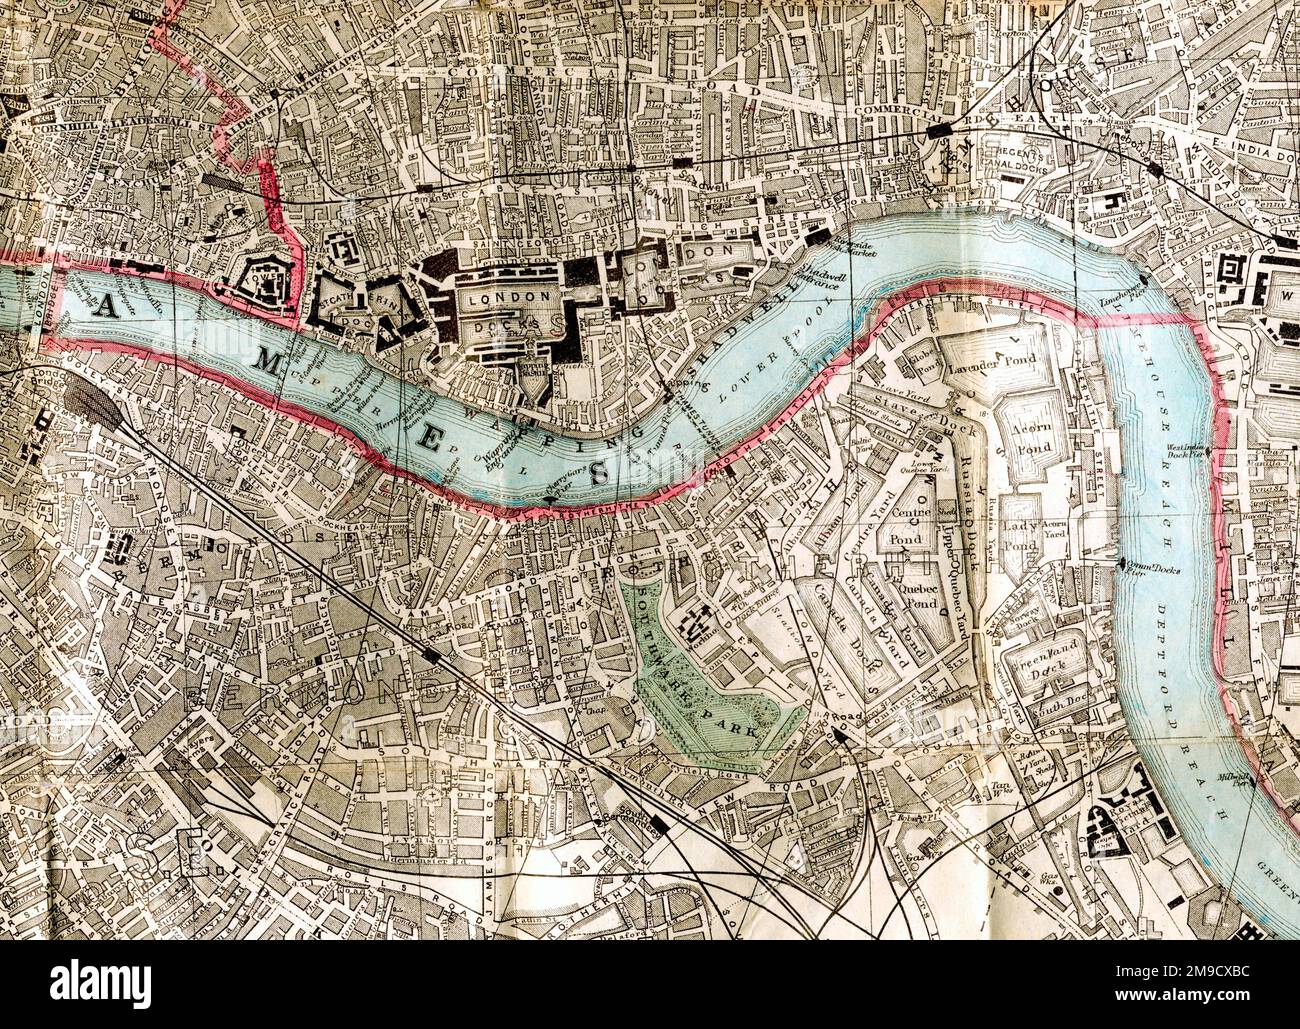 19th century Map of London Docks, Wapping and Shadwell (Extract) Stock Photo